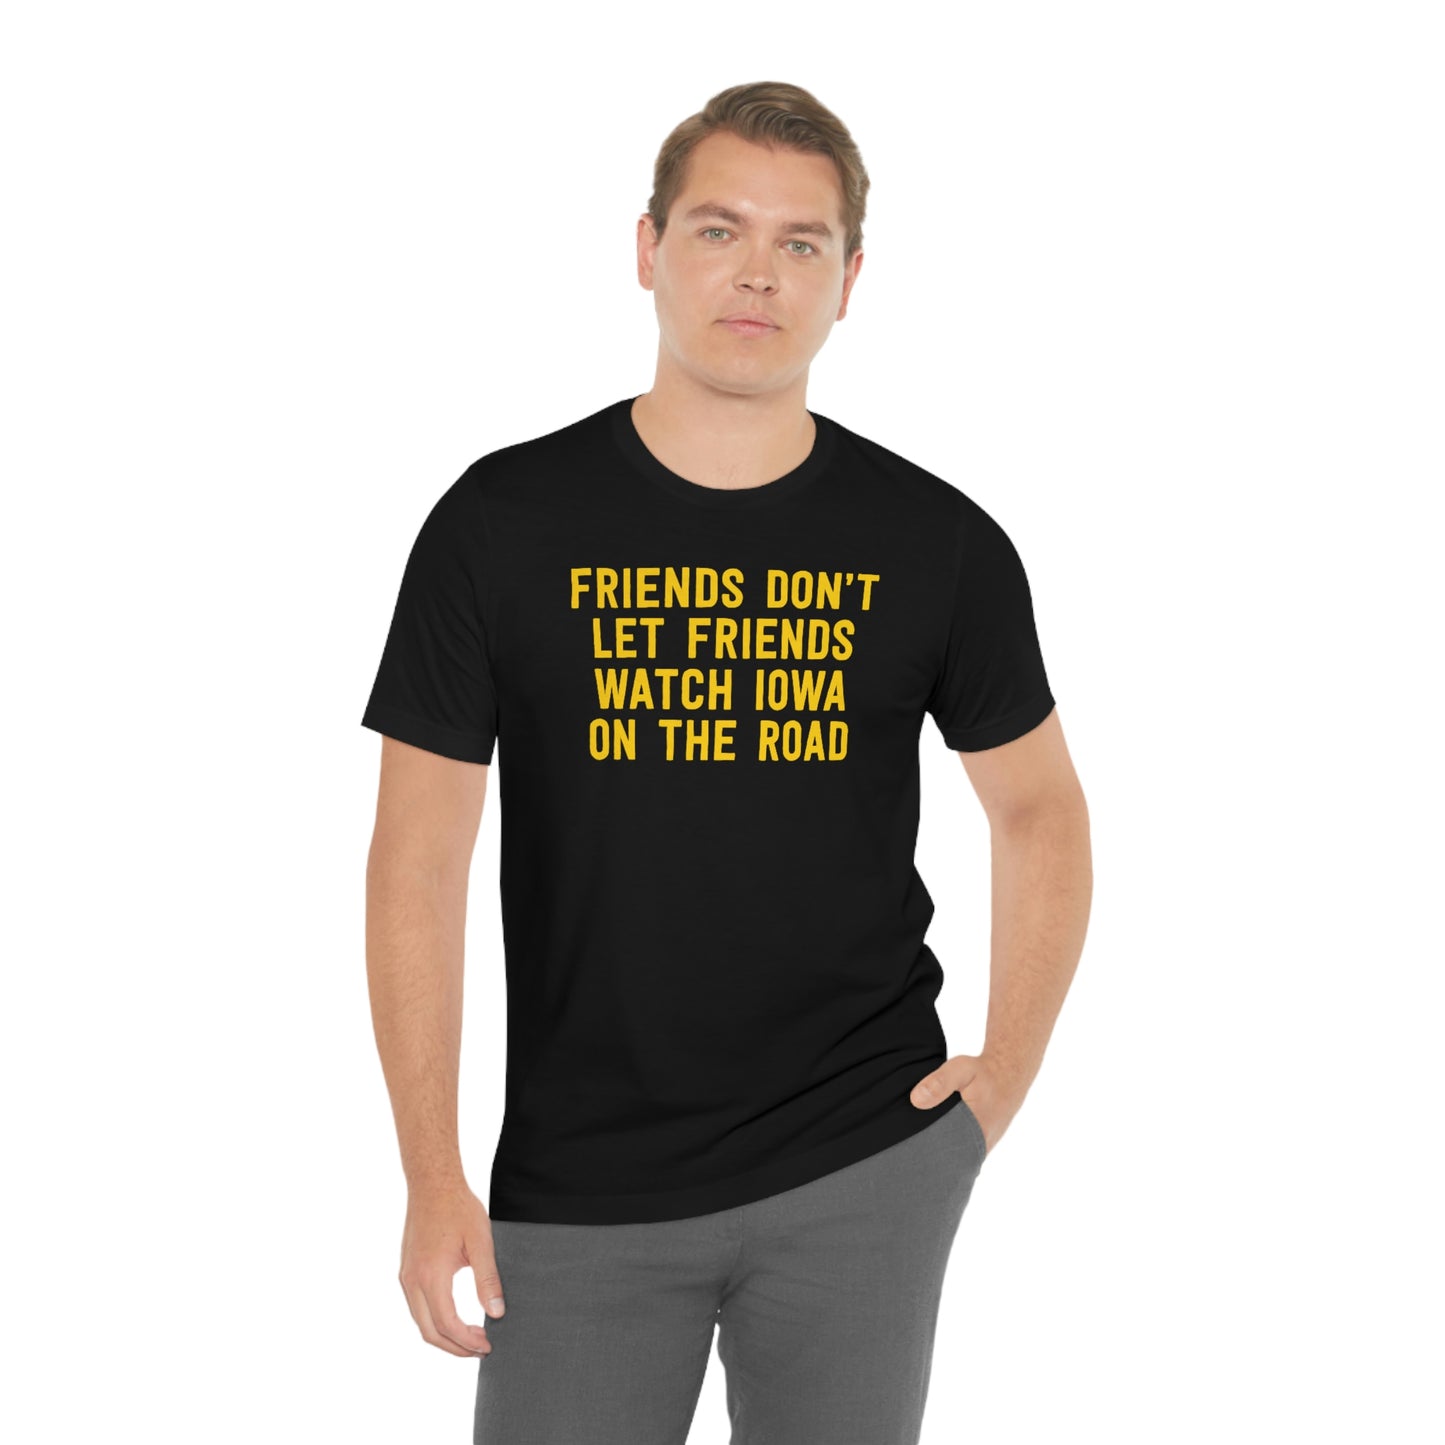 Friends Don't Let Friends Watch Iowa On The Road Shirt in Black and Gold - Male Model